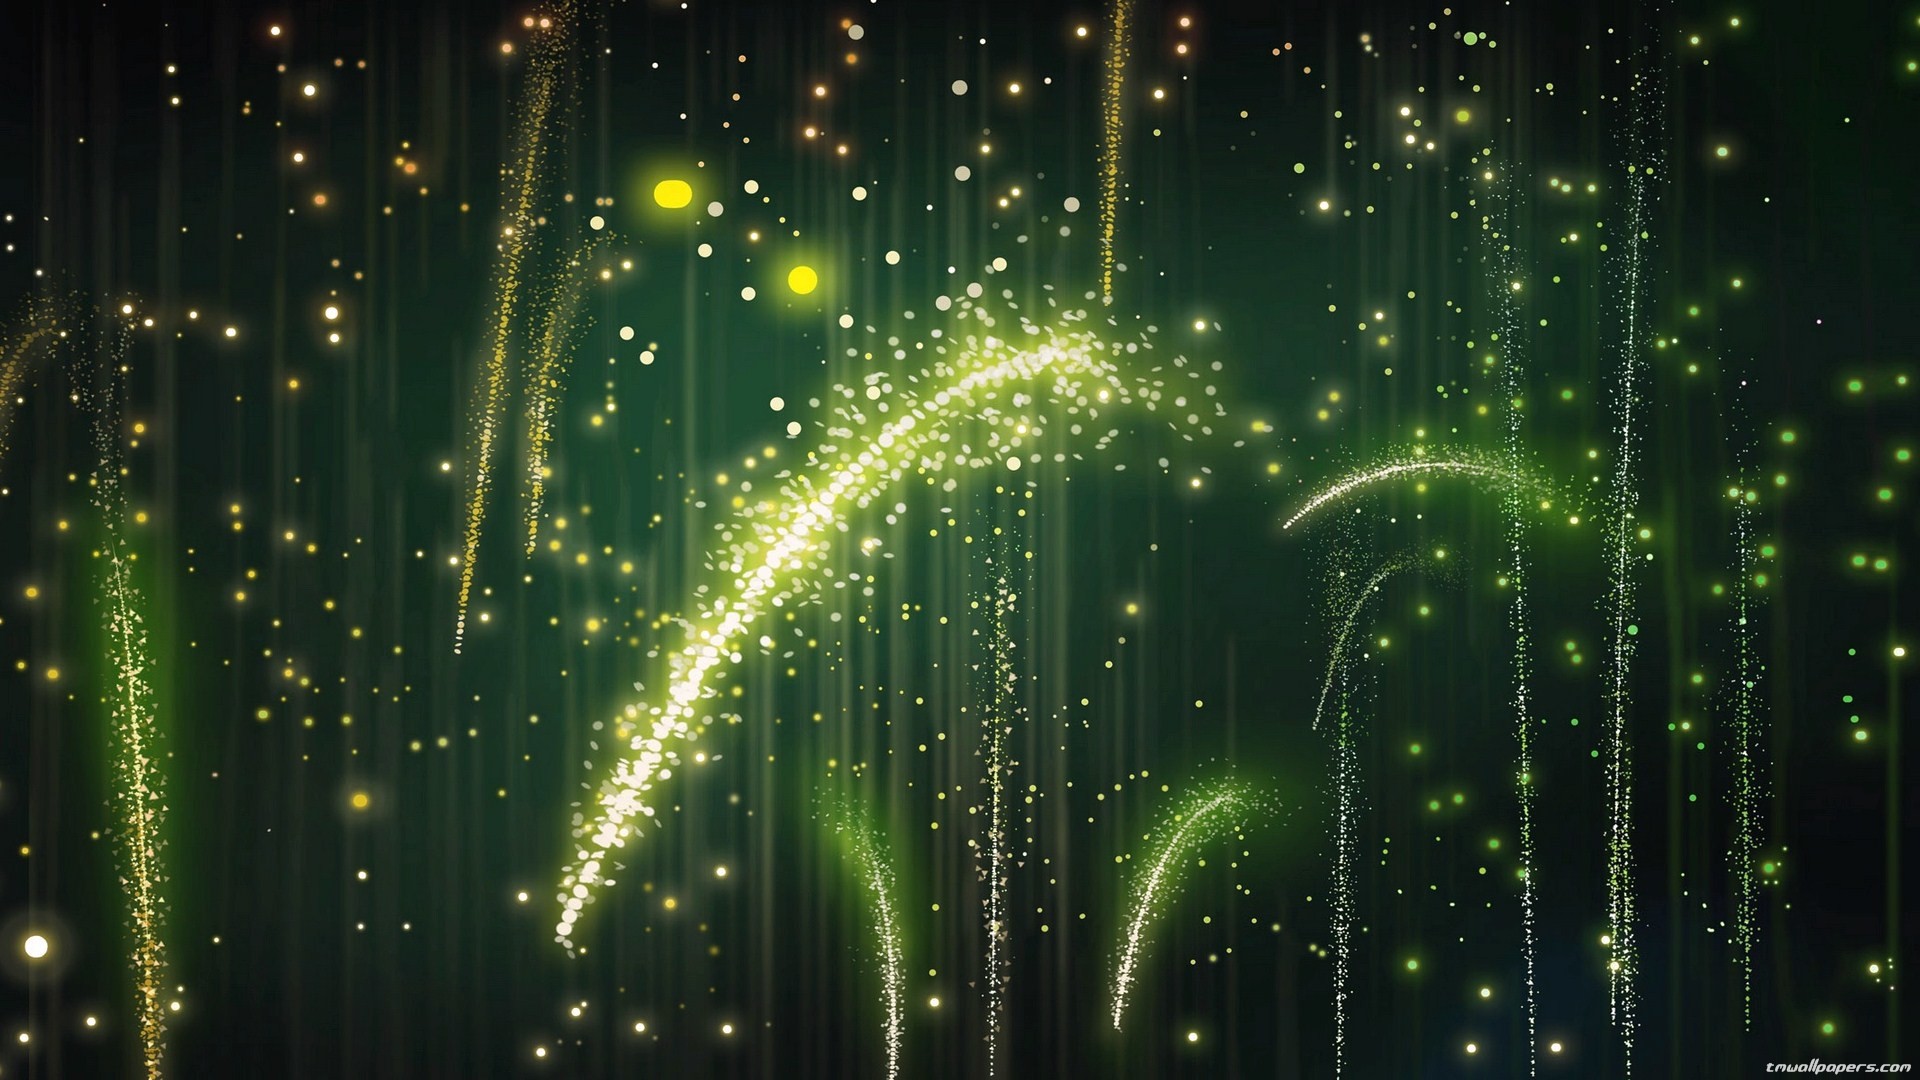 1920x1080 Green abstract wide wallpapers 1280x800 1440x900 1680x1050 1920x1200